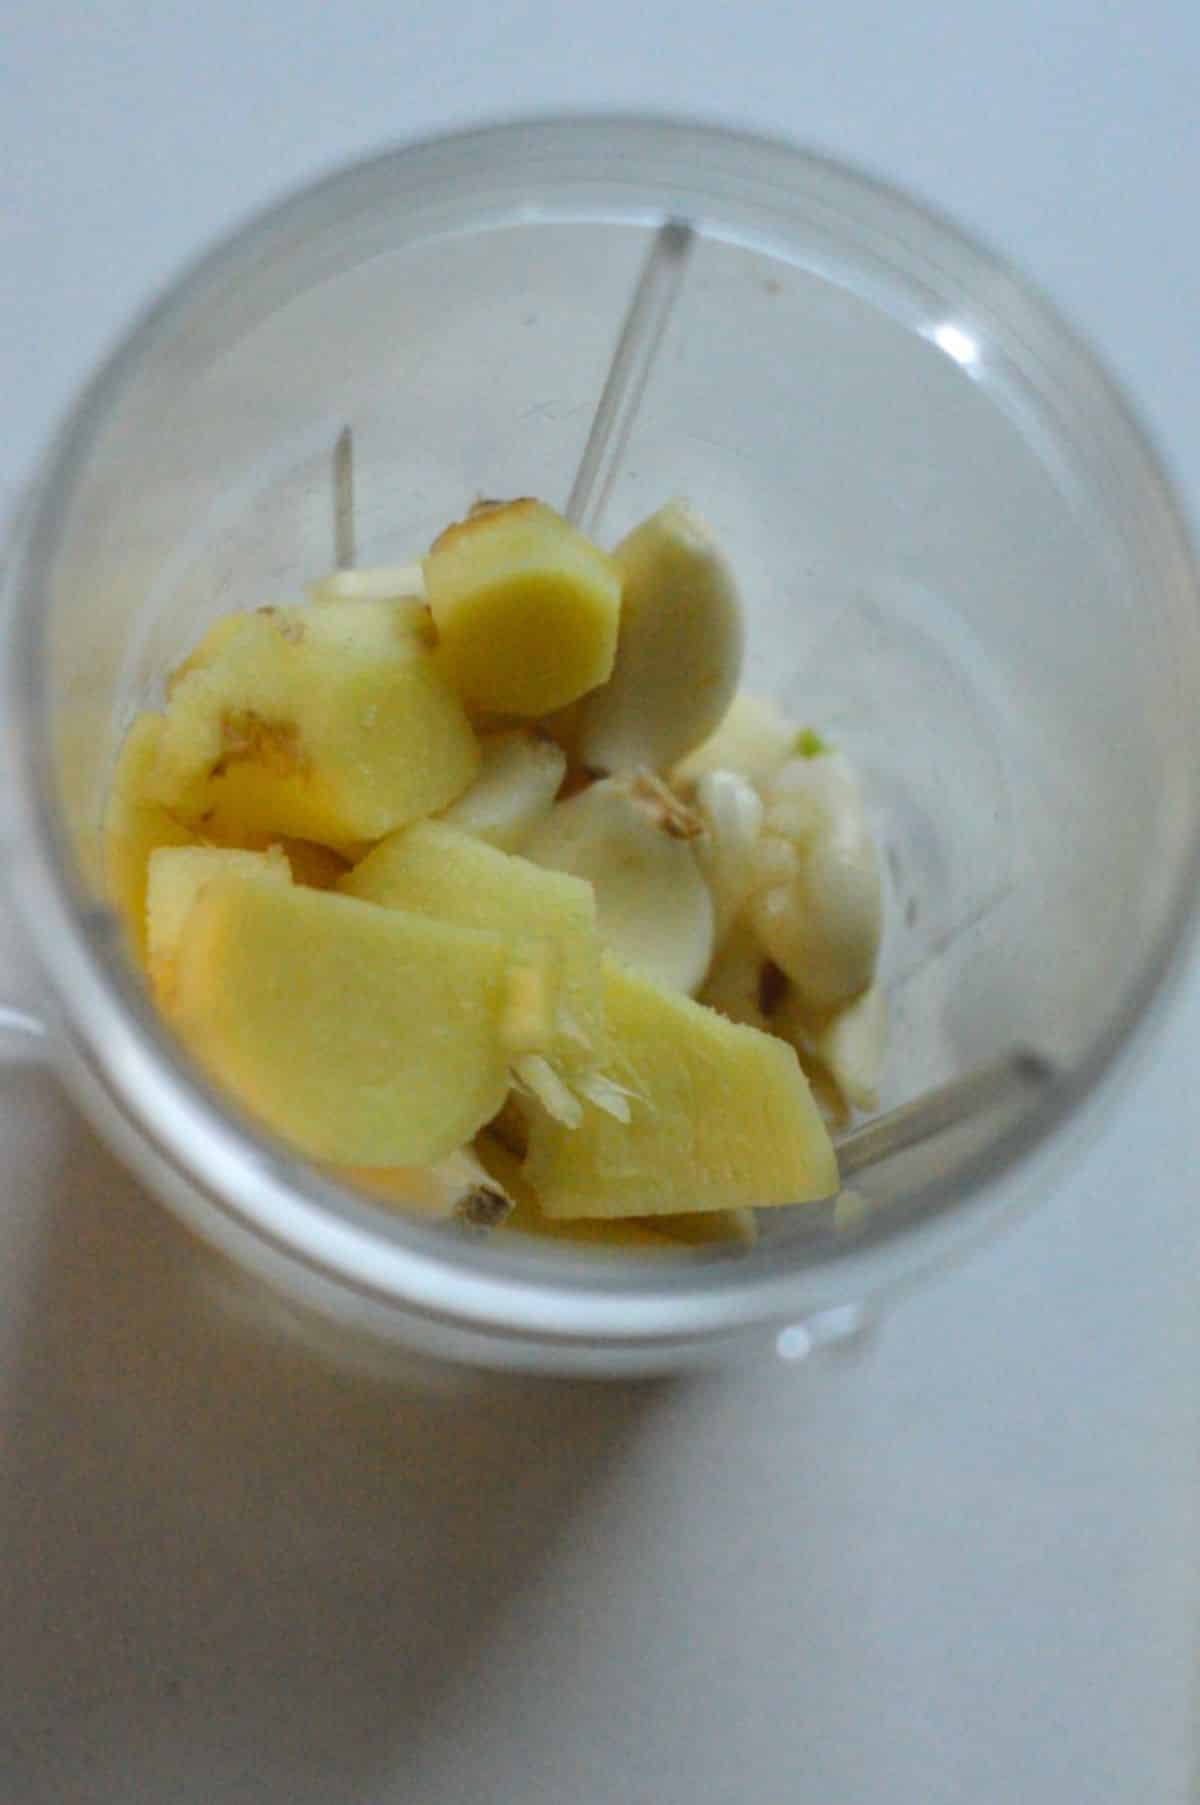 Sliced ginger root and peeled garlic cloved in a blender.